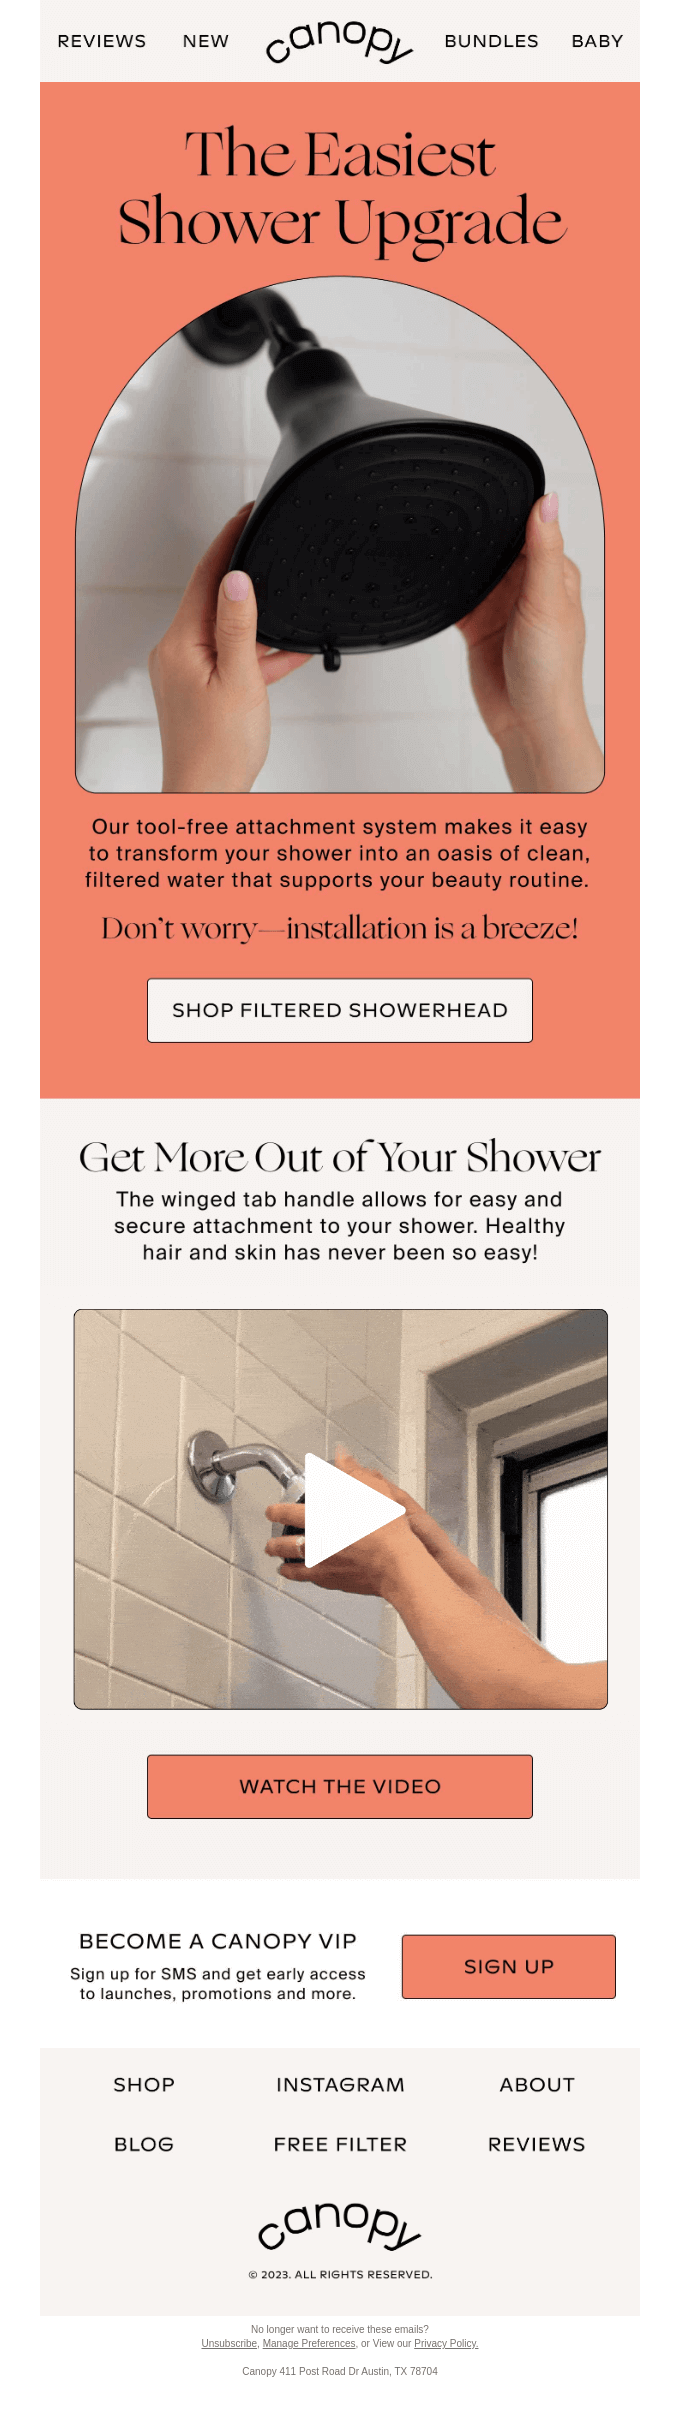 Retention email from Canopy that shows how easy it is to upgrade your shower and get more out of it